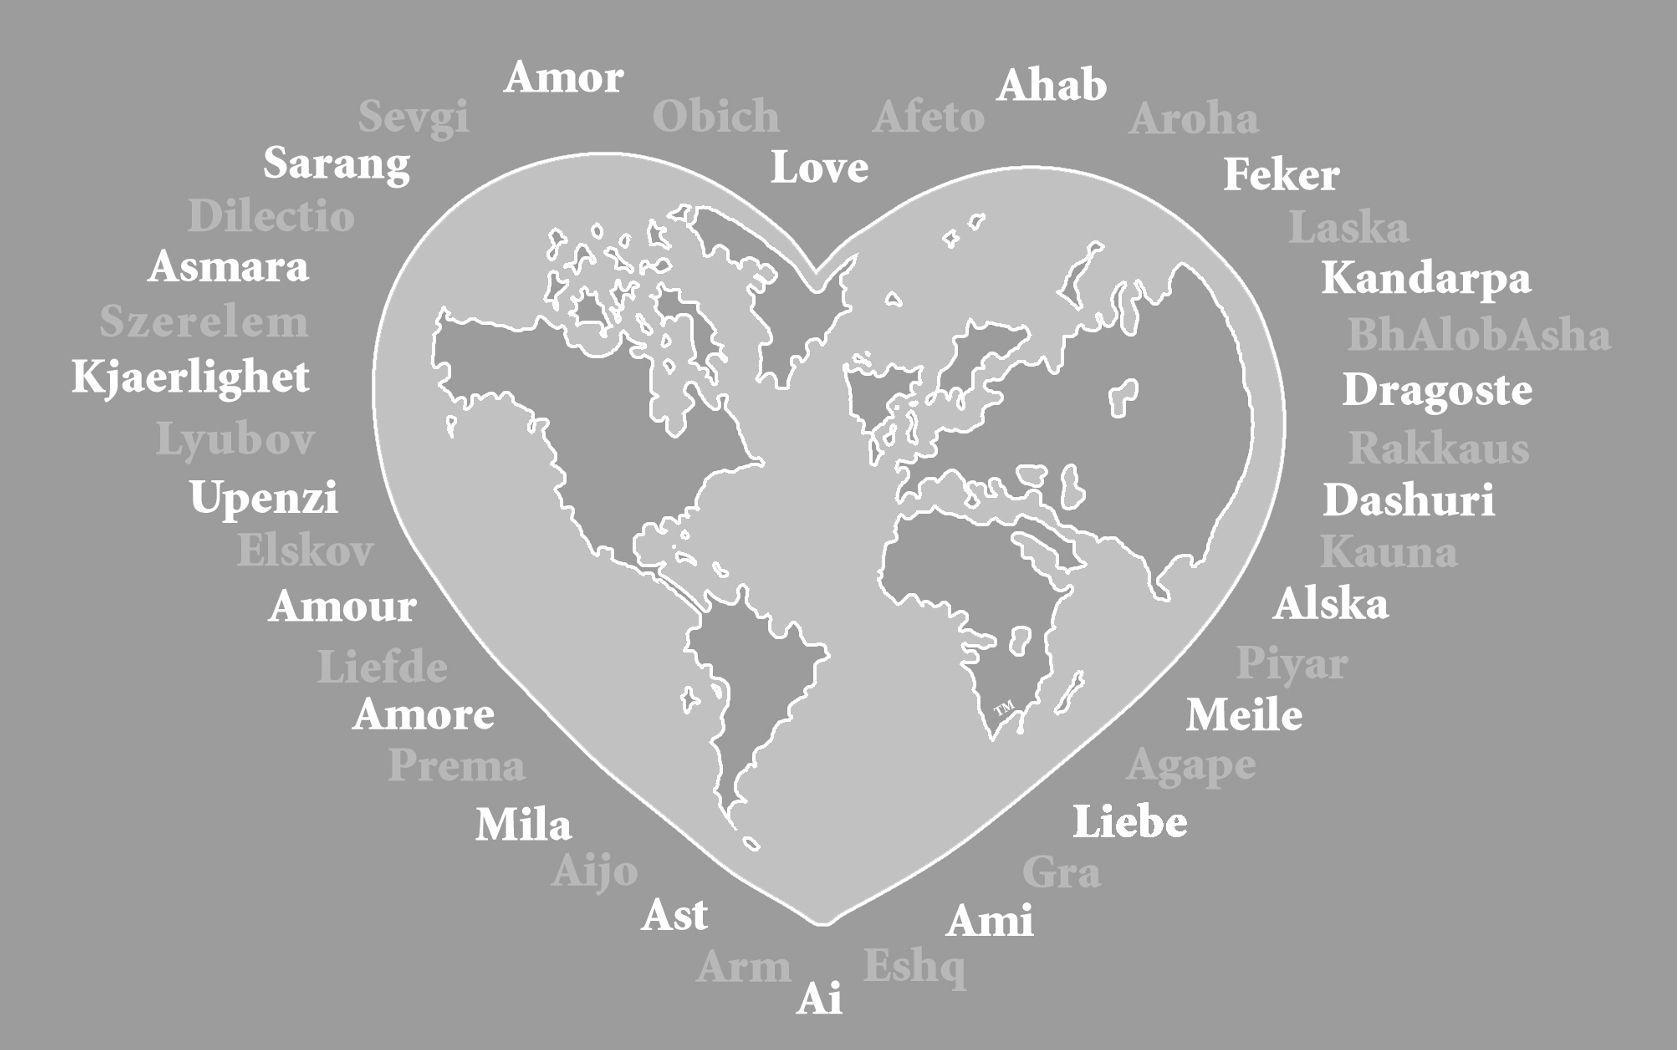 Love is the same in any language Computer Wallpaper, Desktop